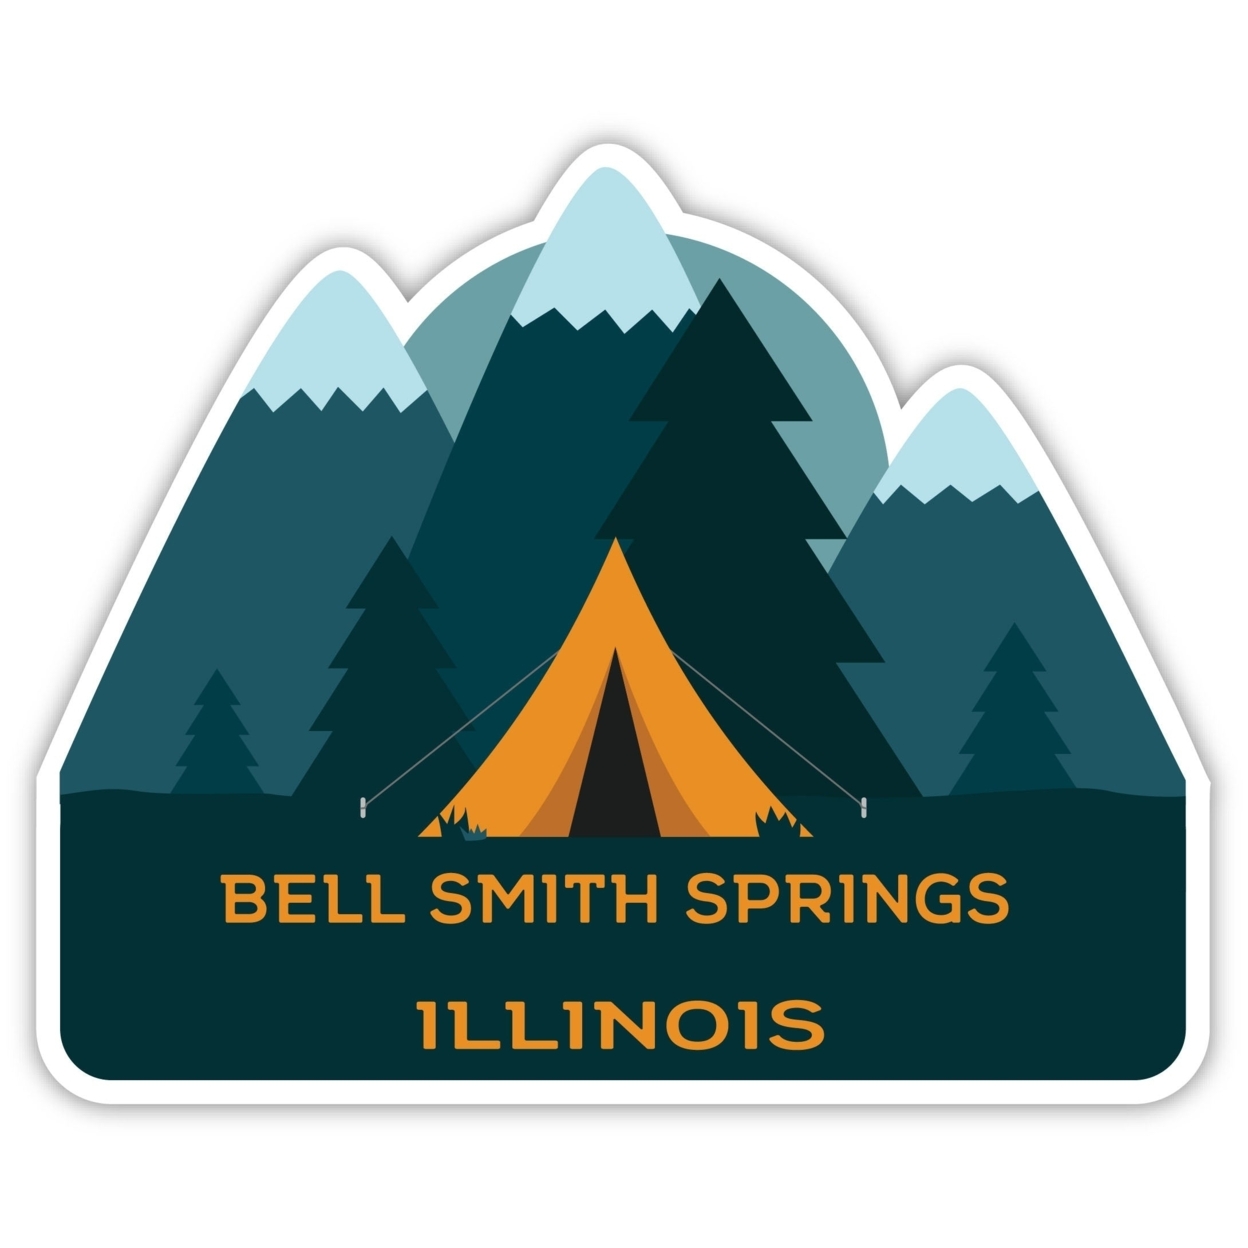 Bell Smith Springs Illinois Souvenir Decorative Stickers (Choose Theme And Size) - Single Unit, 8-Inch, Tent